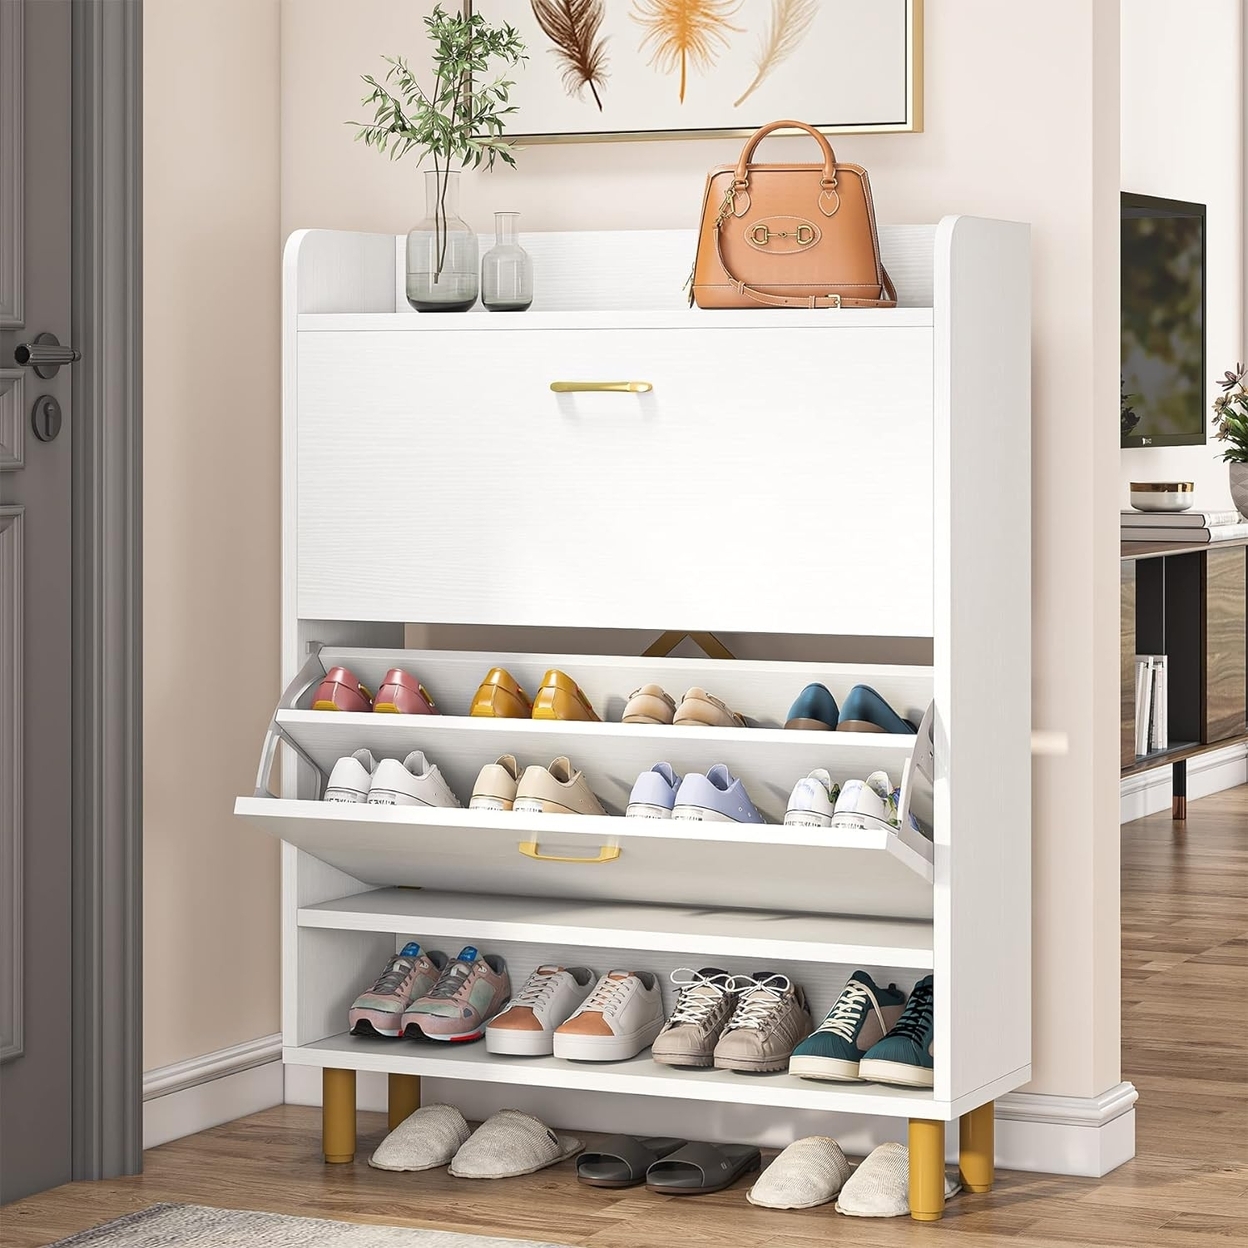 Tribesigns Shoe Cabinet, 2-Tier Shoe Storage Cabinet With Flip Doors, Vintage Entryway Shoe Organizer Rack With Open Shelves - White And Gol